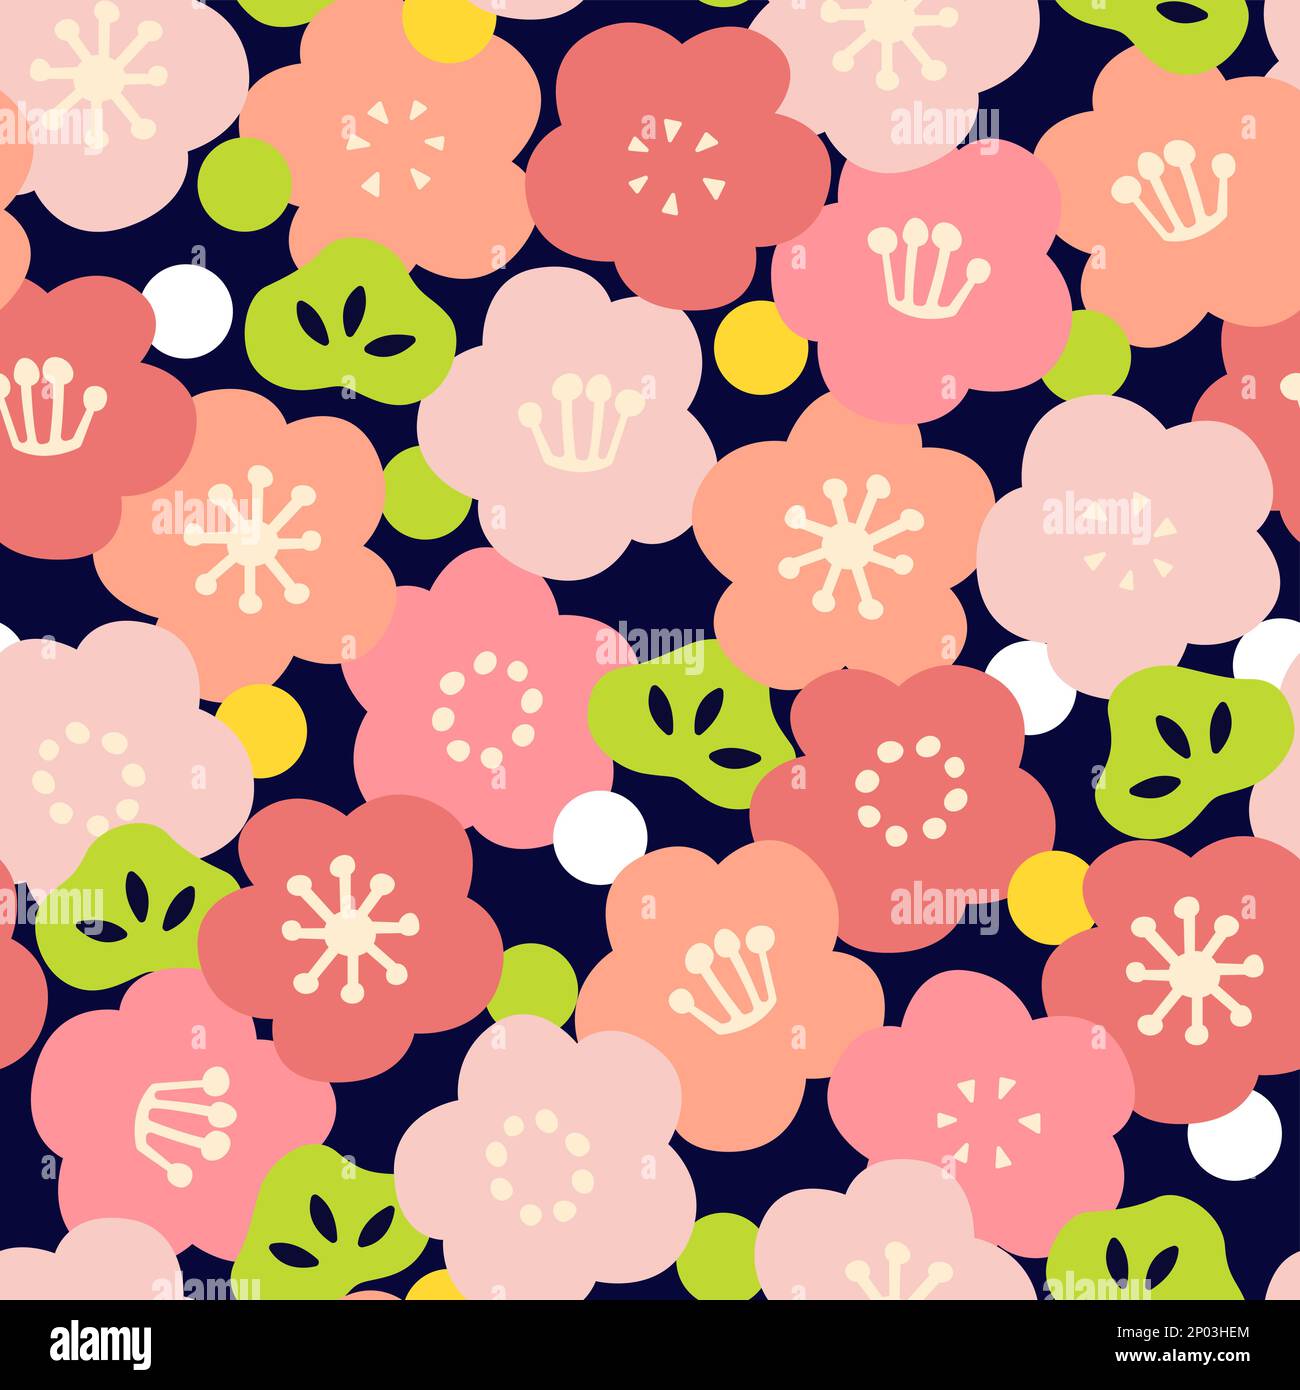 Vector Retro Vintage Japanese Style Abstract Cherry Blossom or Sakura Floral Seamless Surface Pattern for Products, Fabric or Wrapping Paper Prints. Stock Vector